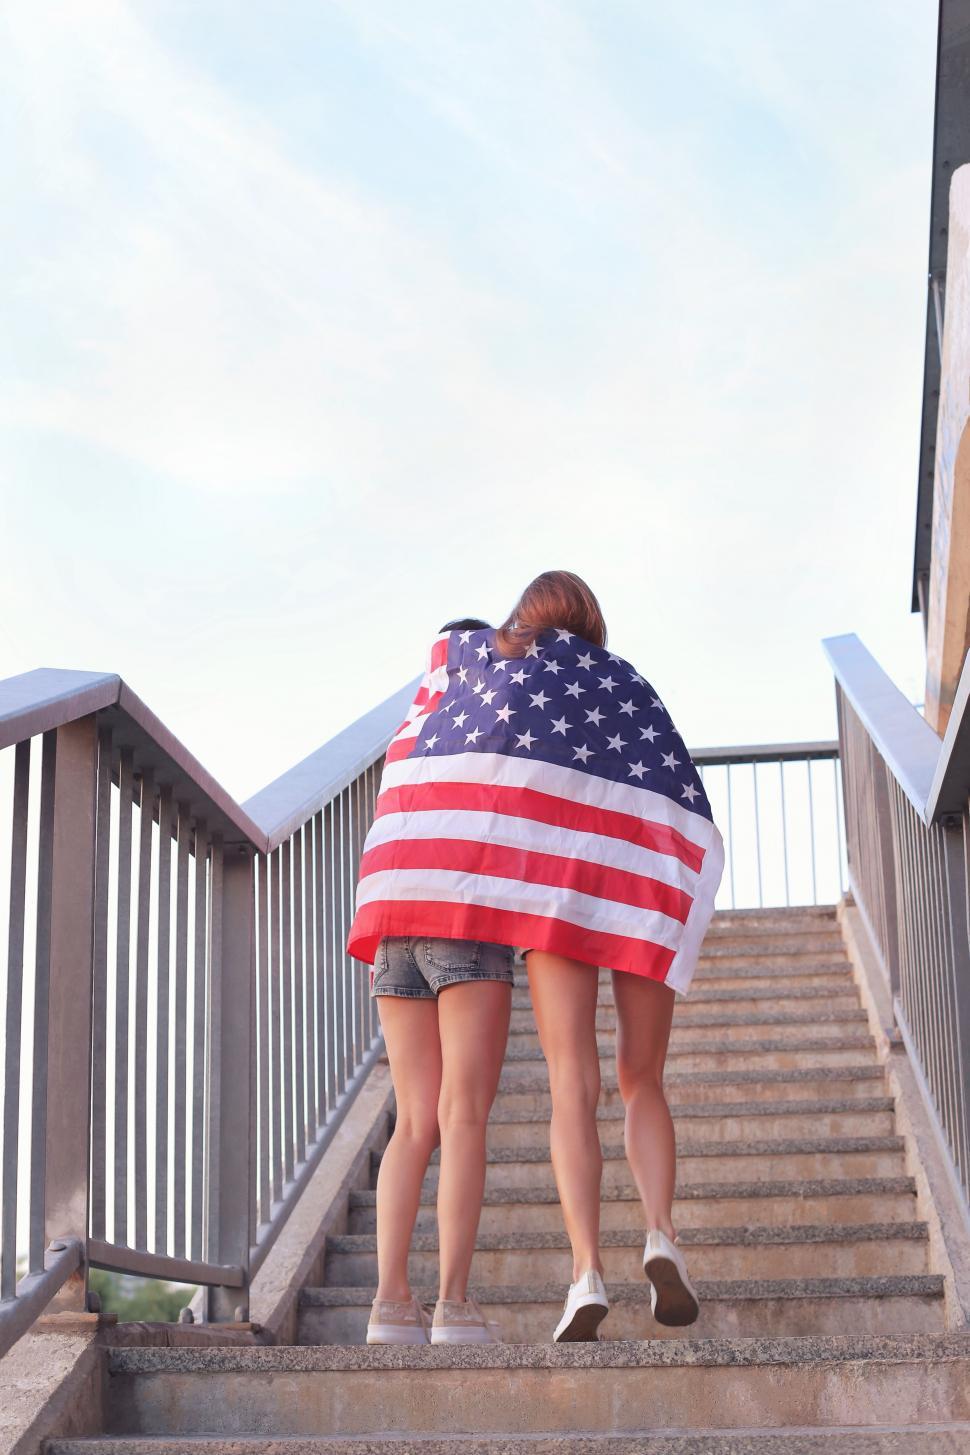 Free Image of Two women wrapped in an American flag 